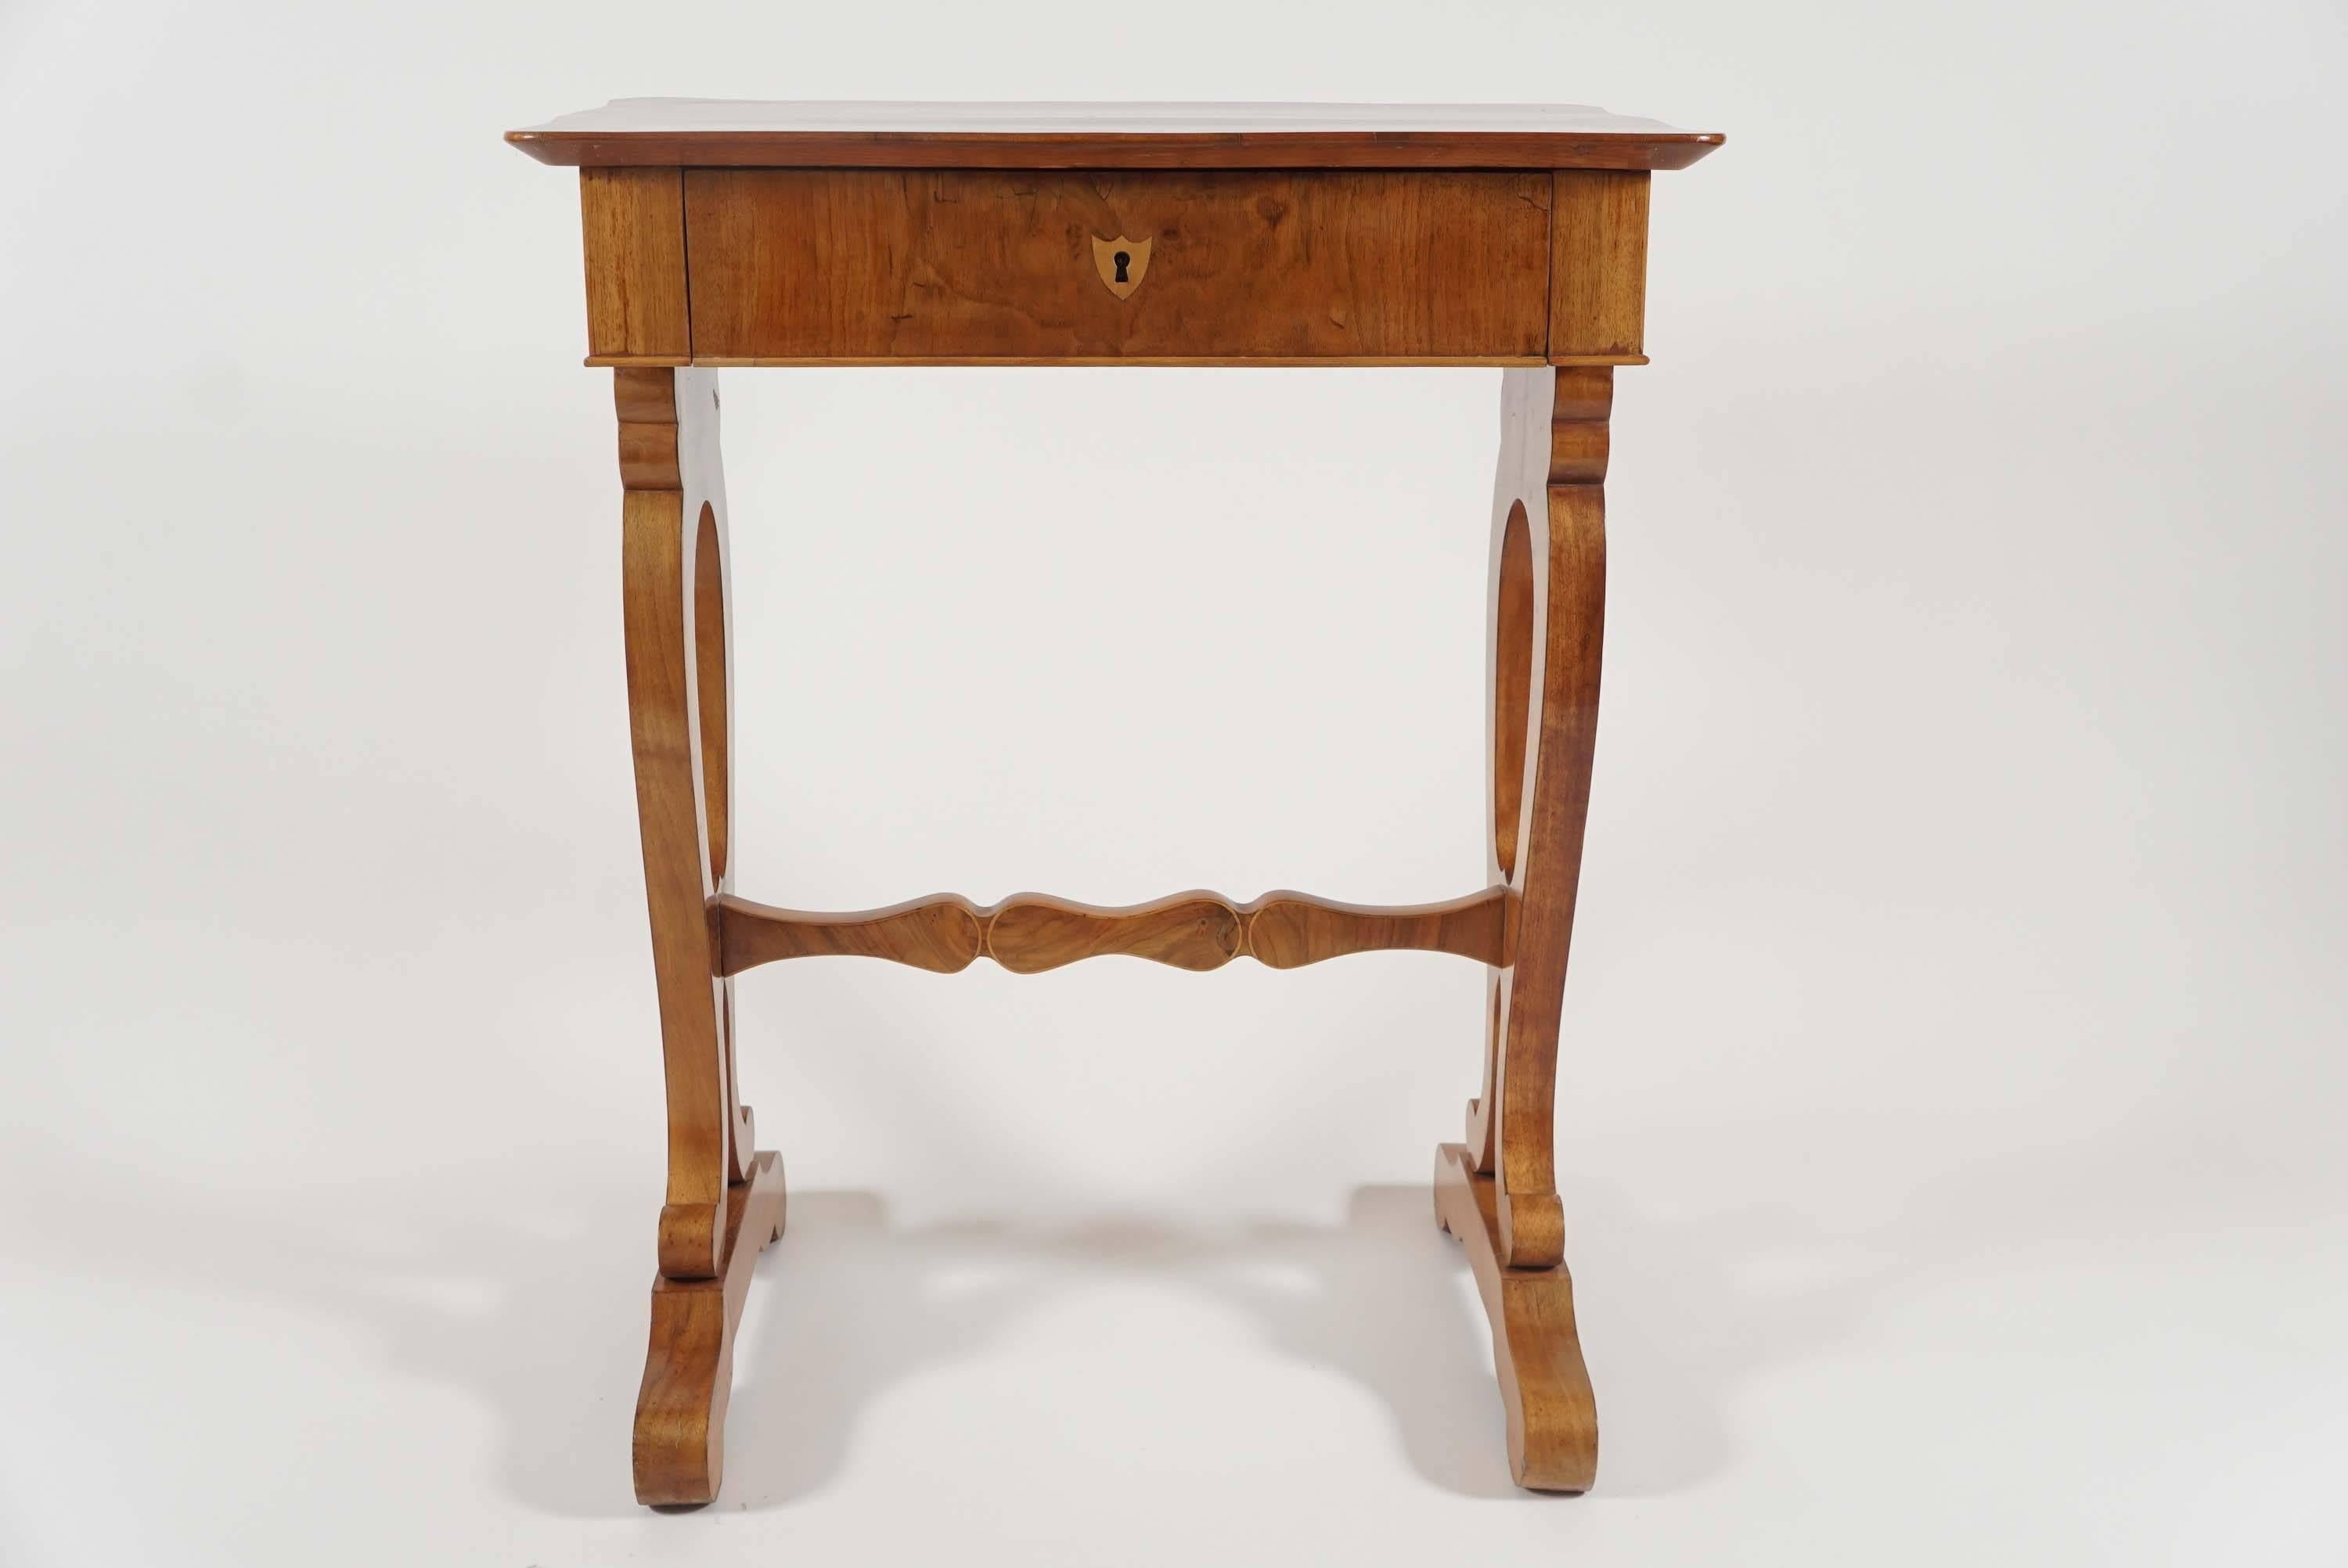 Circa 1830 Vienna, Austria, inlaid walnut Biedermeier stand, occasional, or side table having serpentine edge bookmatched flame-grained top surmounting single drawer with fitted interior and shield-inlaid key escutcheon above trestle-base with